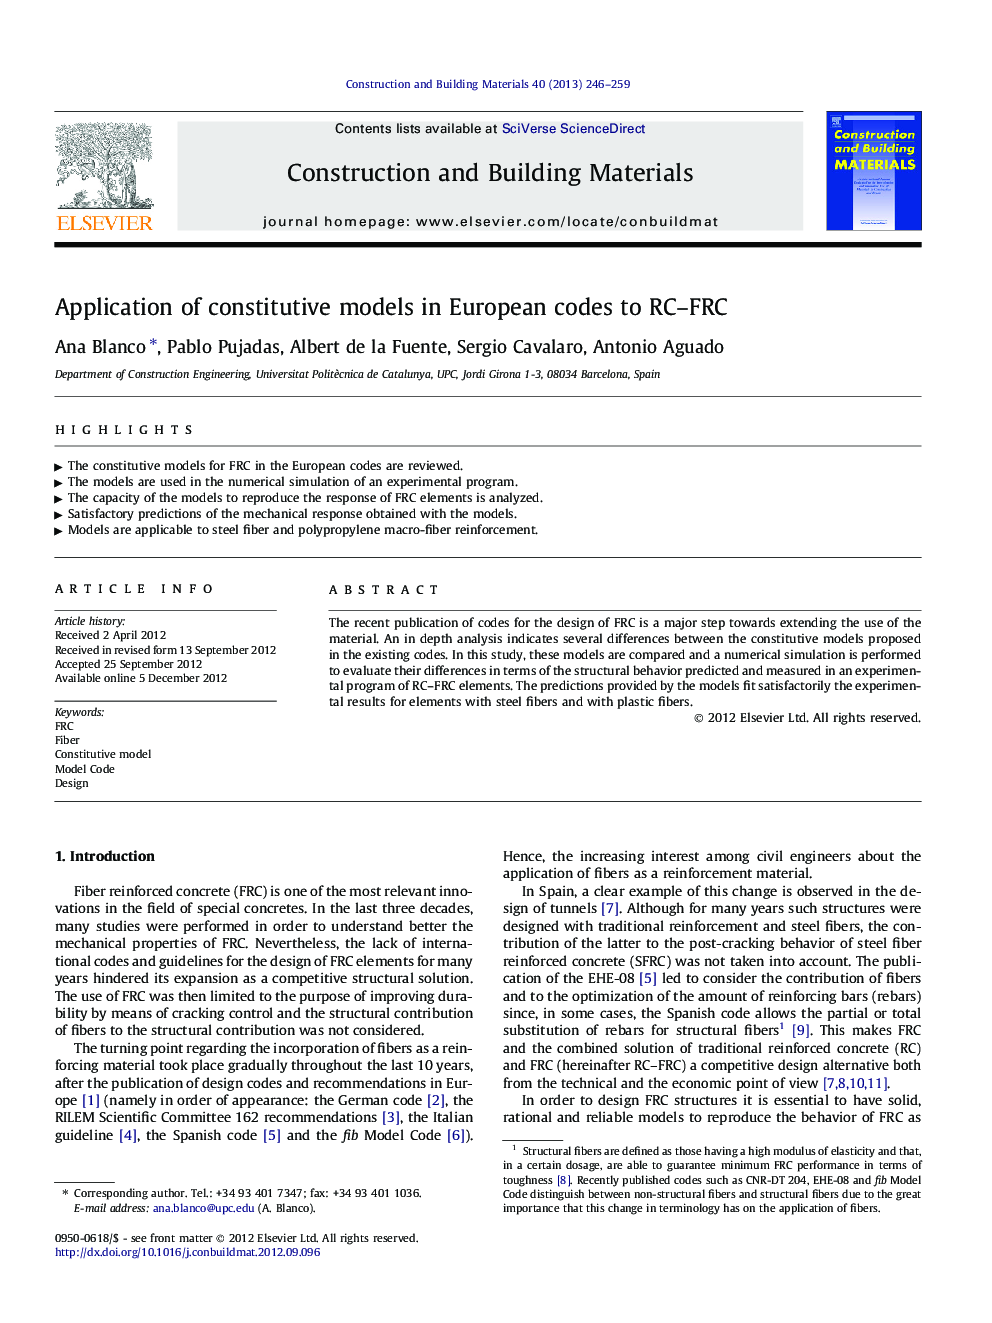 Application of constitutive models in European codes to RC–FRC